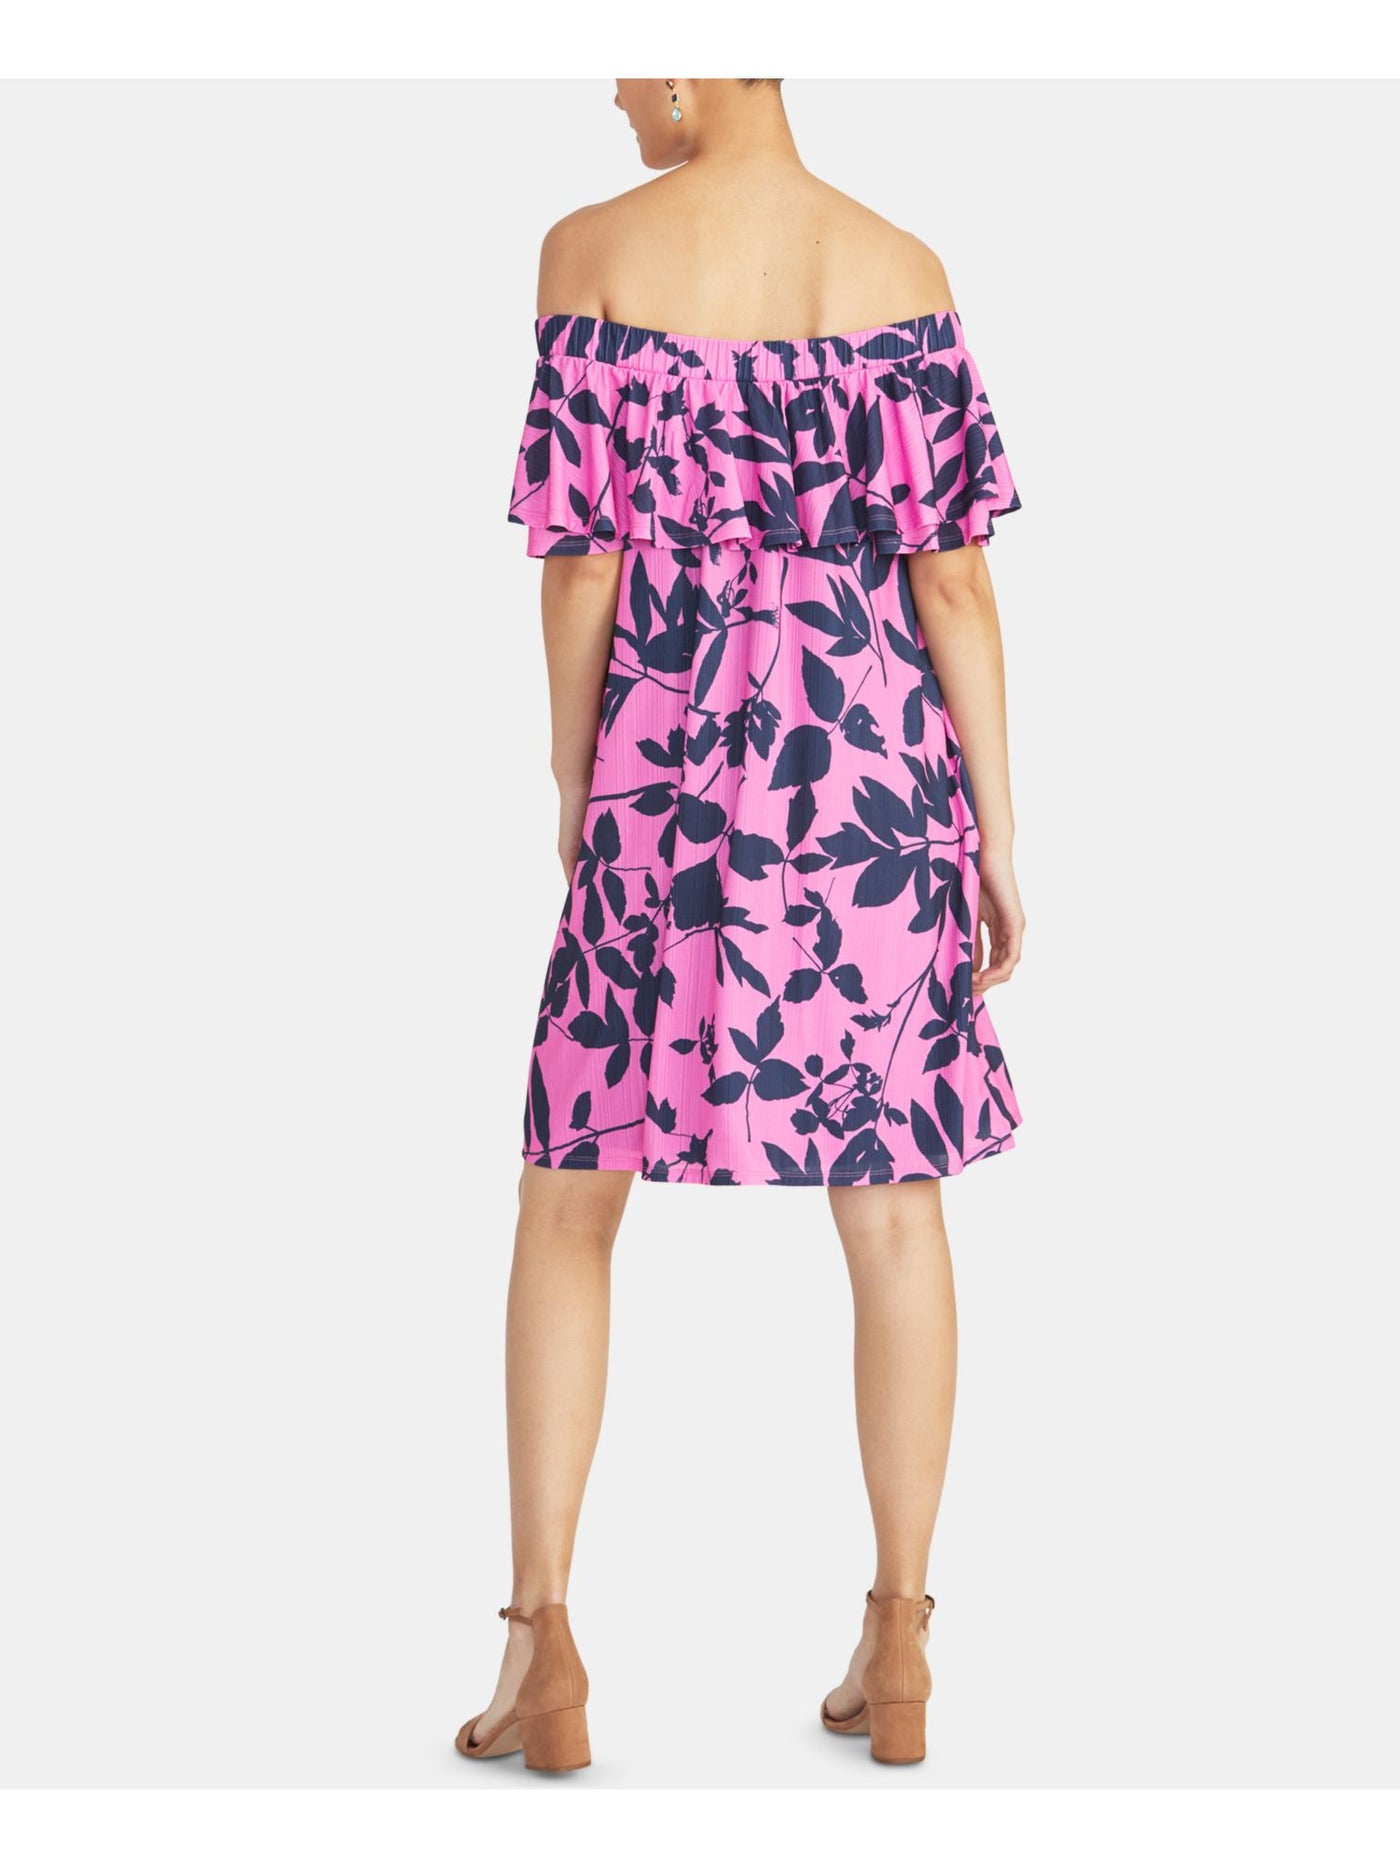 RACHEL ROY Womens Pink Floral Short Sleeve Off Shoulder Above The Knee Party Shift Dress XS